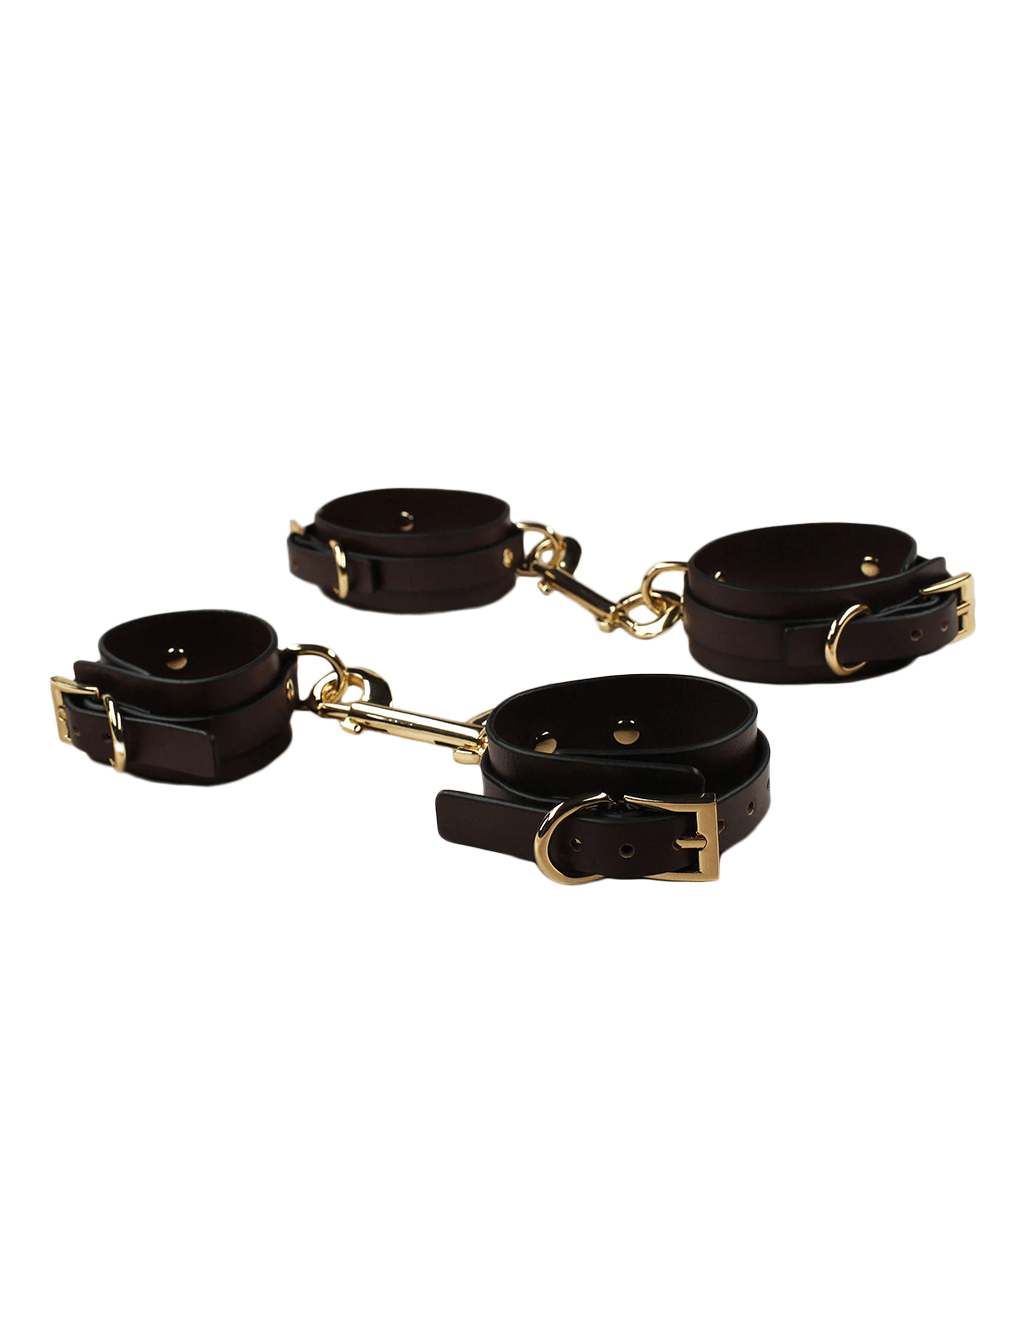 Edonista Venice Brown & Gold 13pc Bondage Set - Handcuffs and Ankle Cuffs